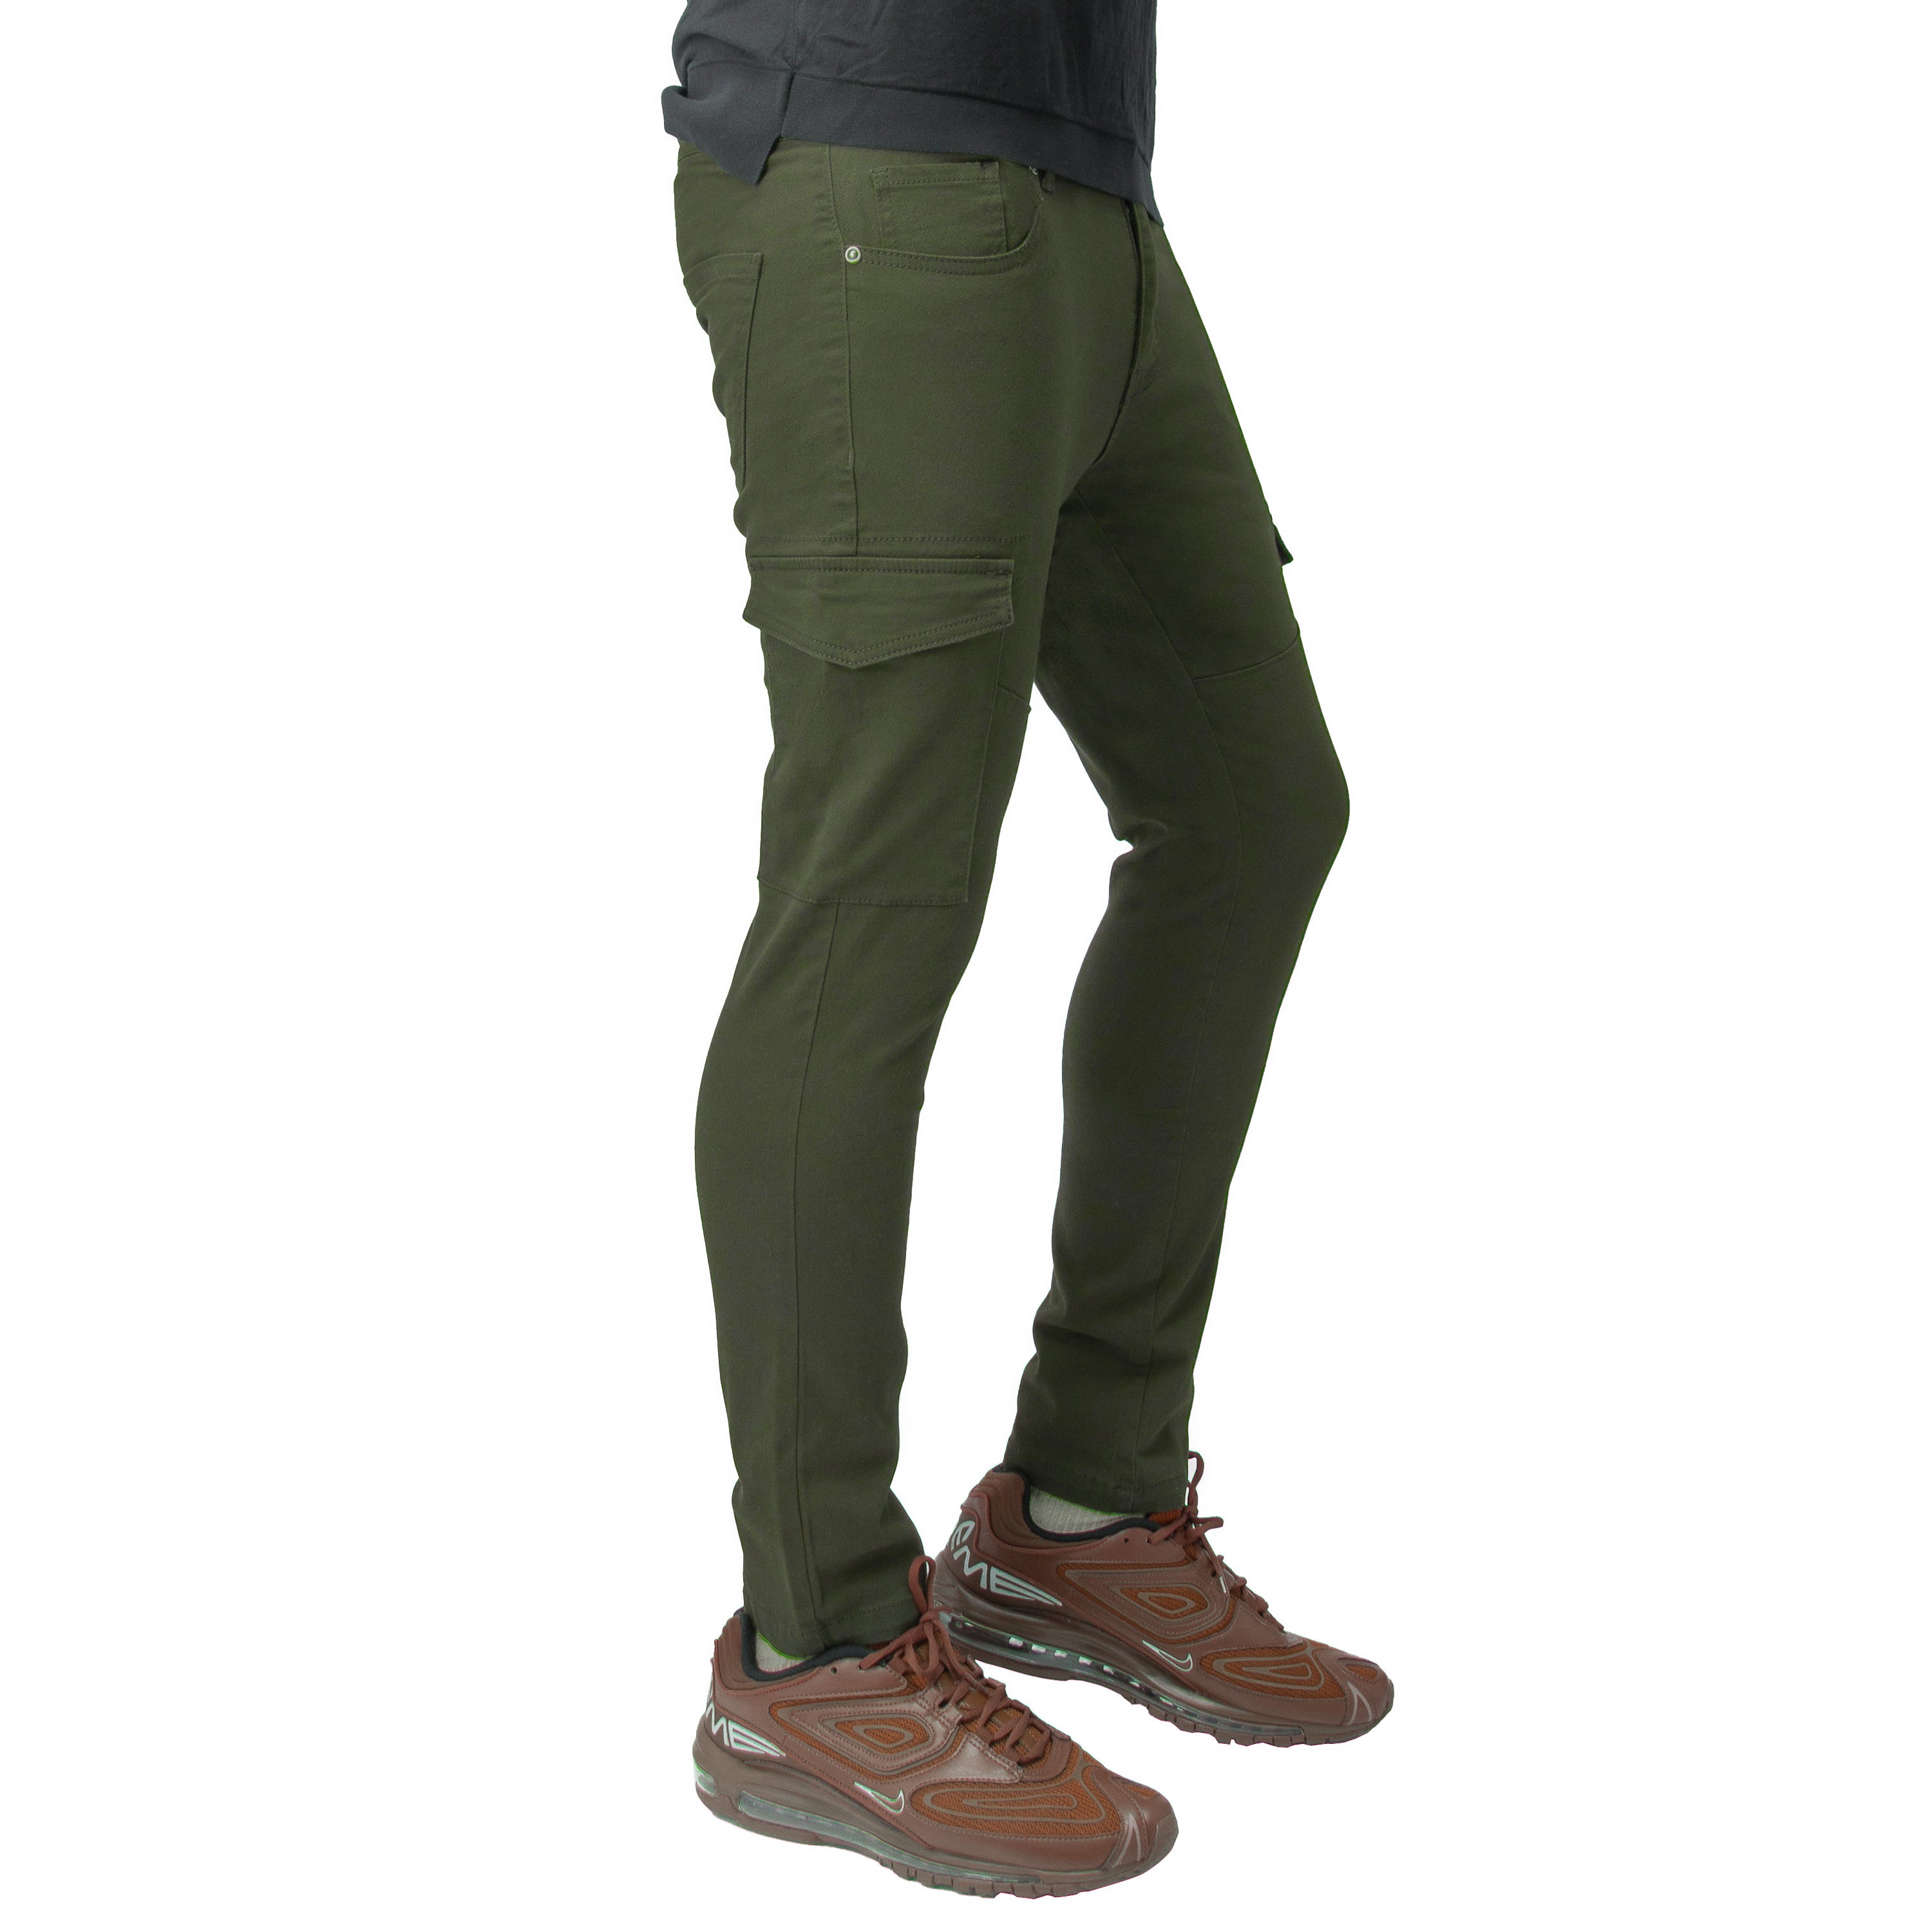 X Ray Men's Slim Fit Stretch Commuter Colored Pants In Tabacco